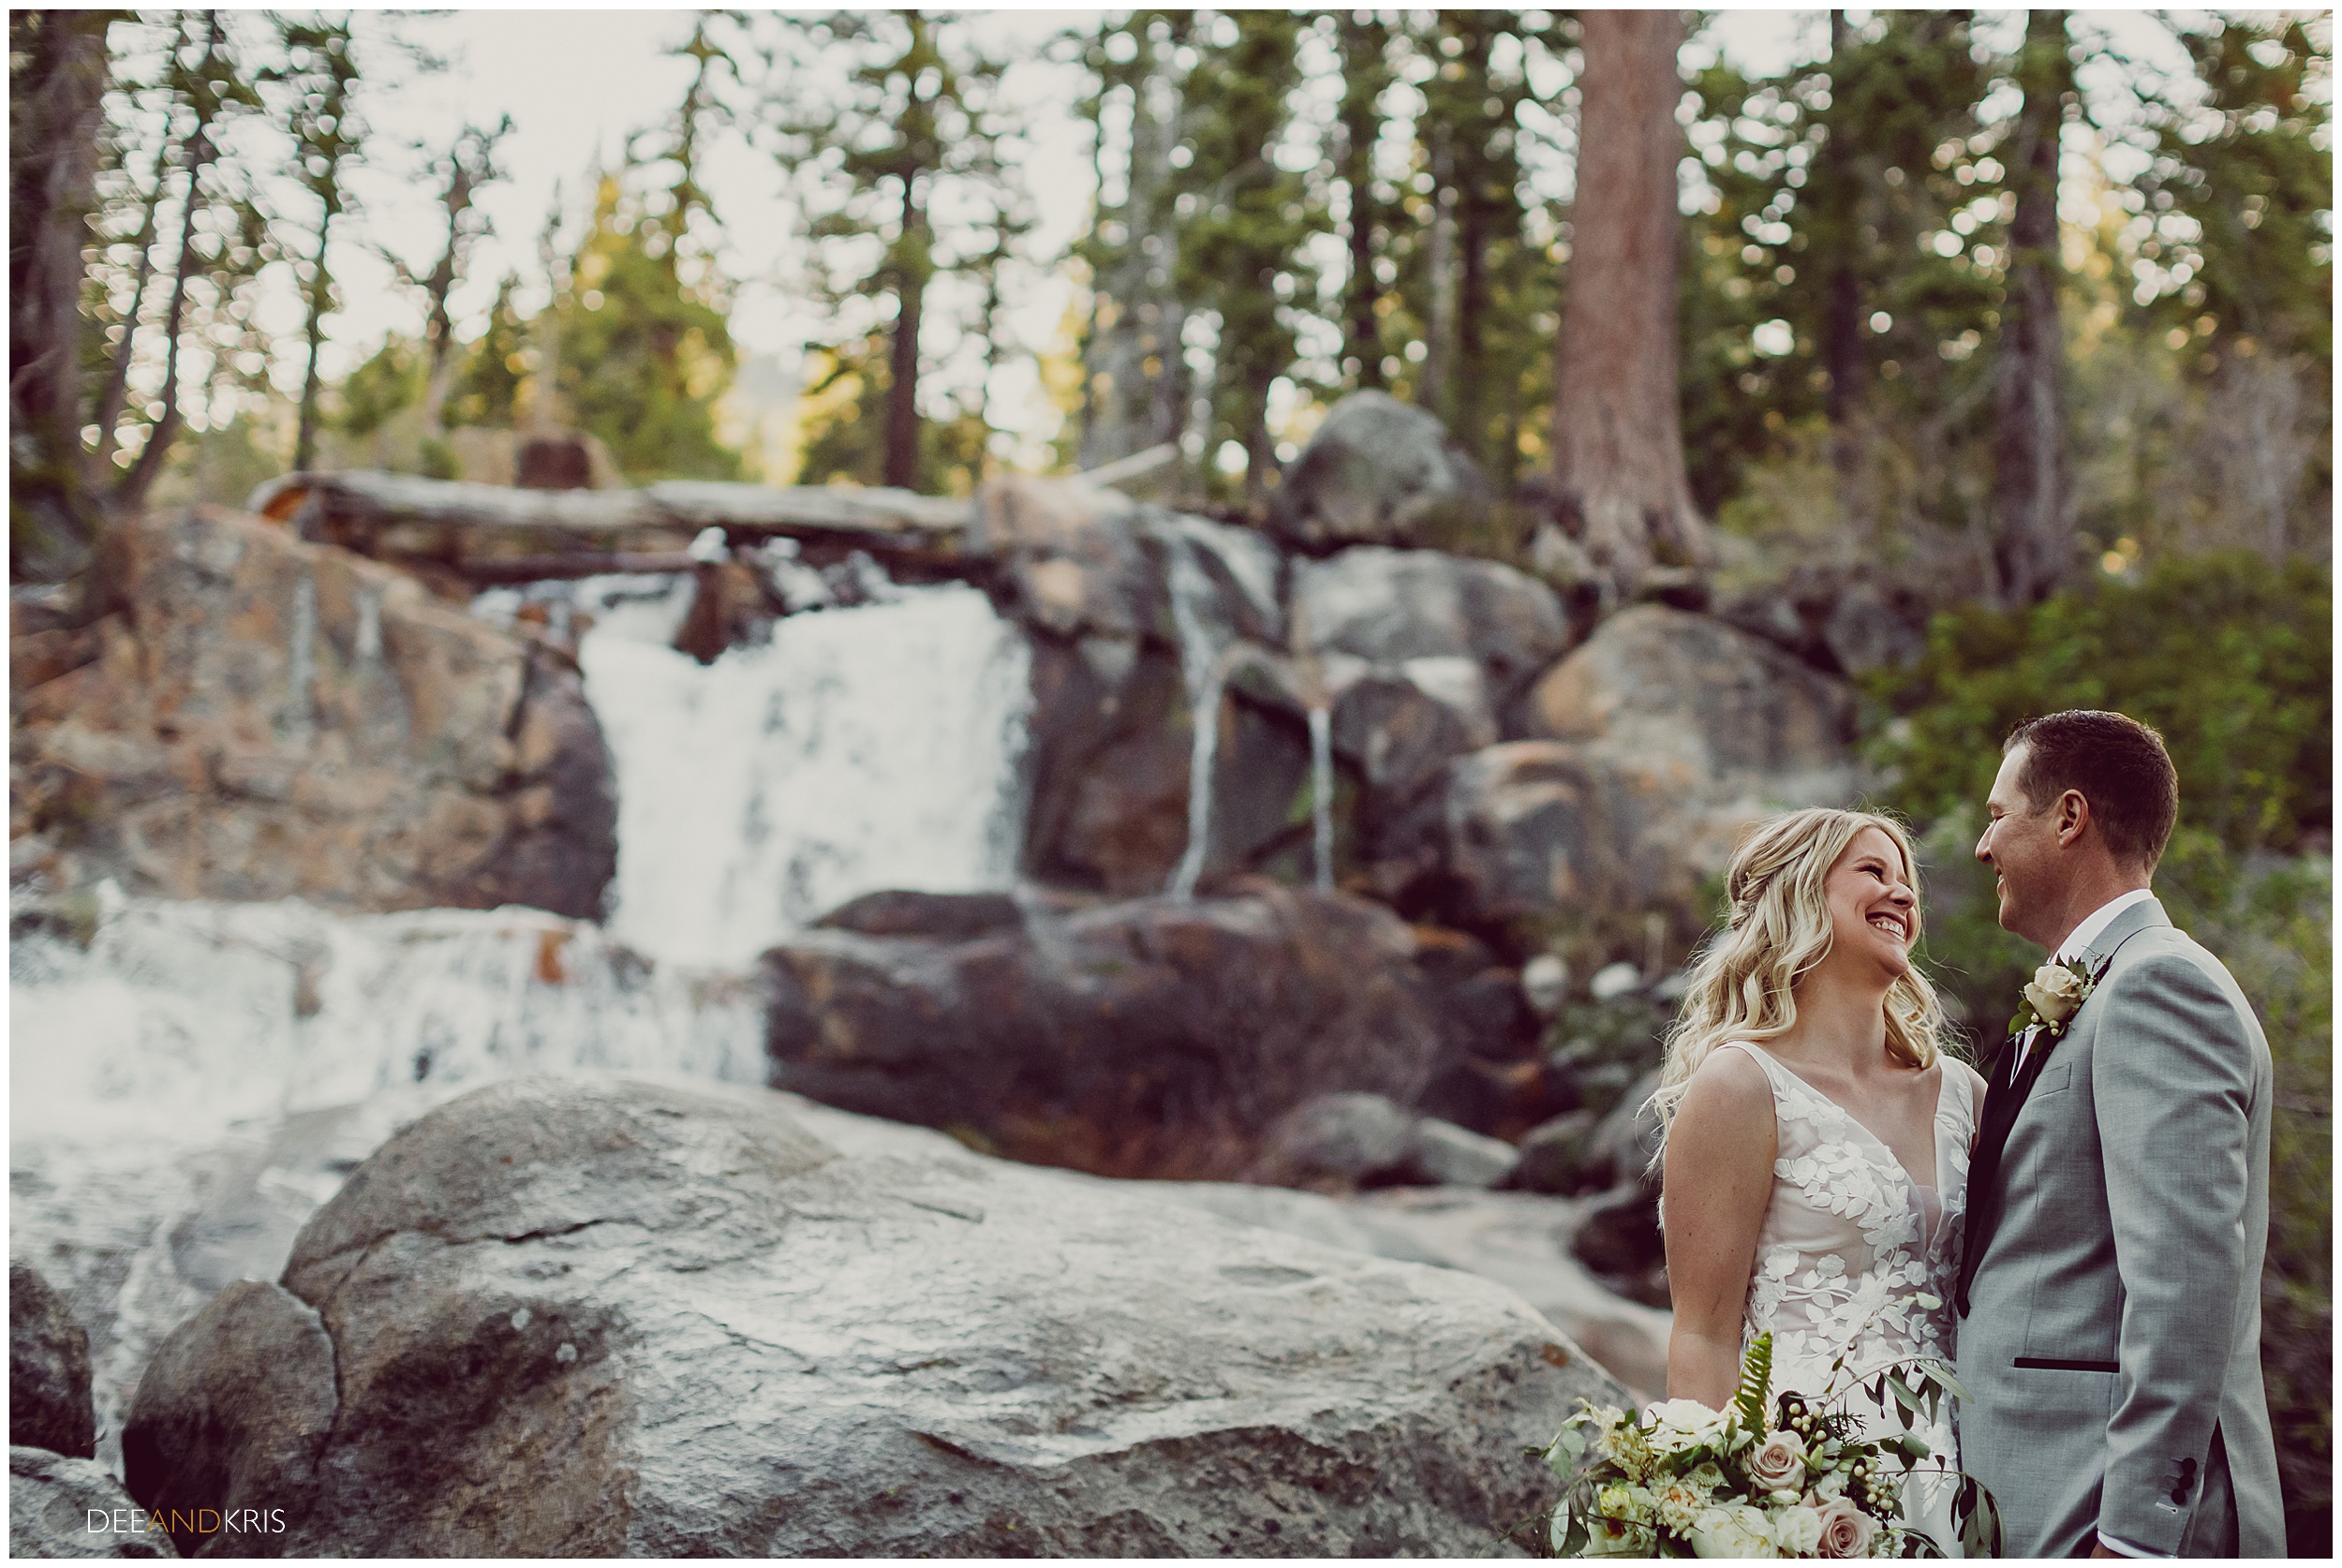 Elopement at Shirley Canyon, hiking trails in Lake Tahoe, Unique places to elope in Northern California, signing the marriage license 